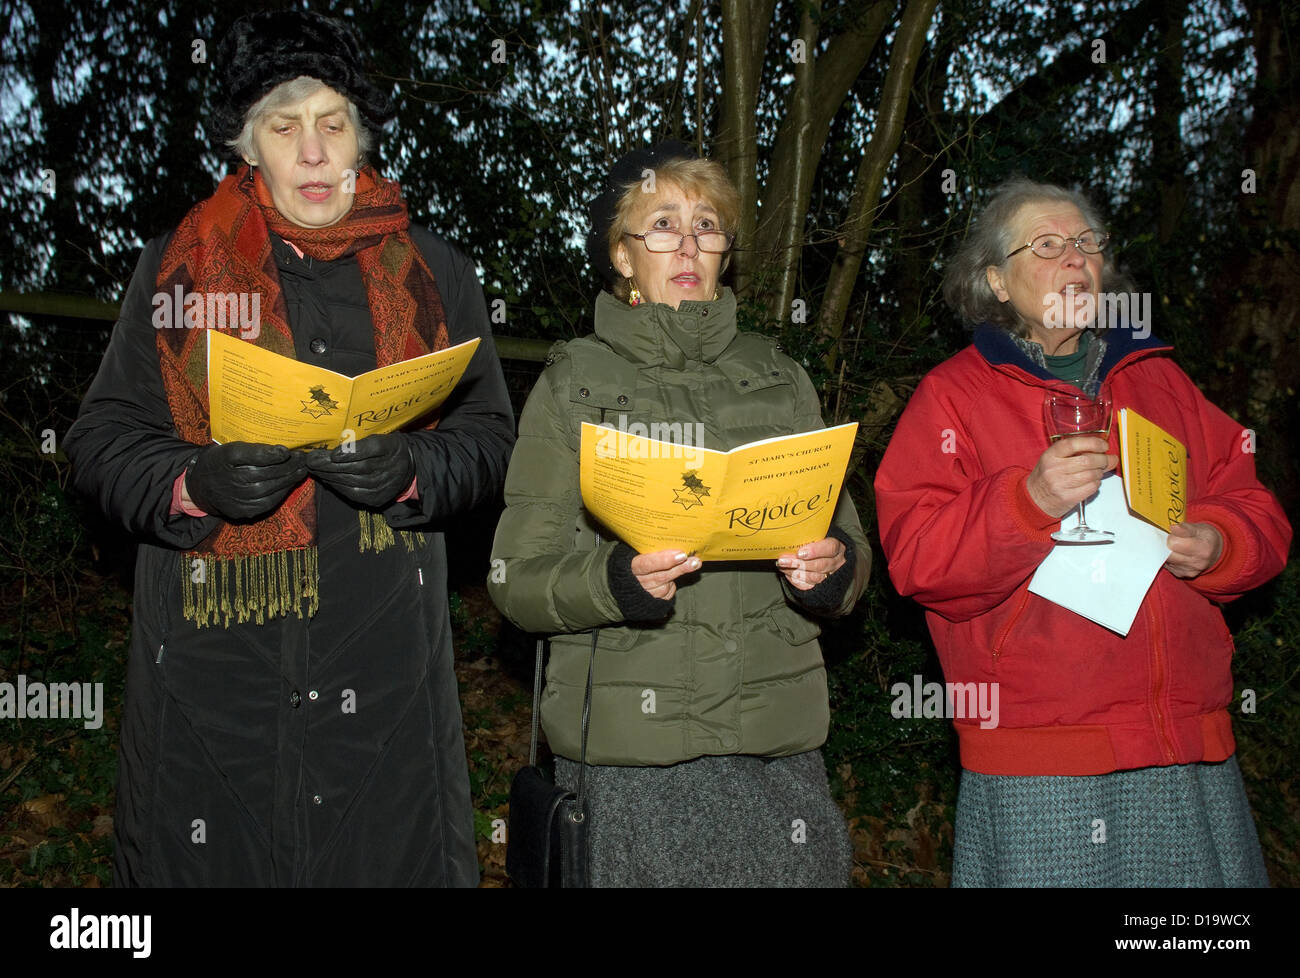 Local elderly residents singing at an evening outdoor carol service at christmas time, Farnham, Surrey, UK. Stock Photo